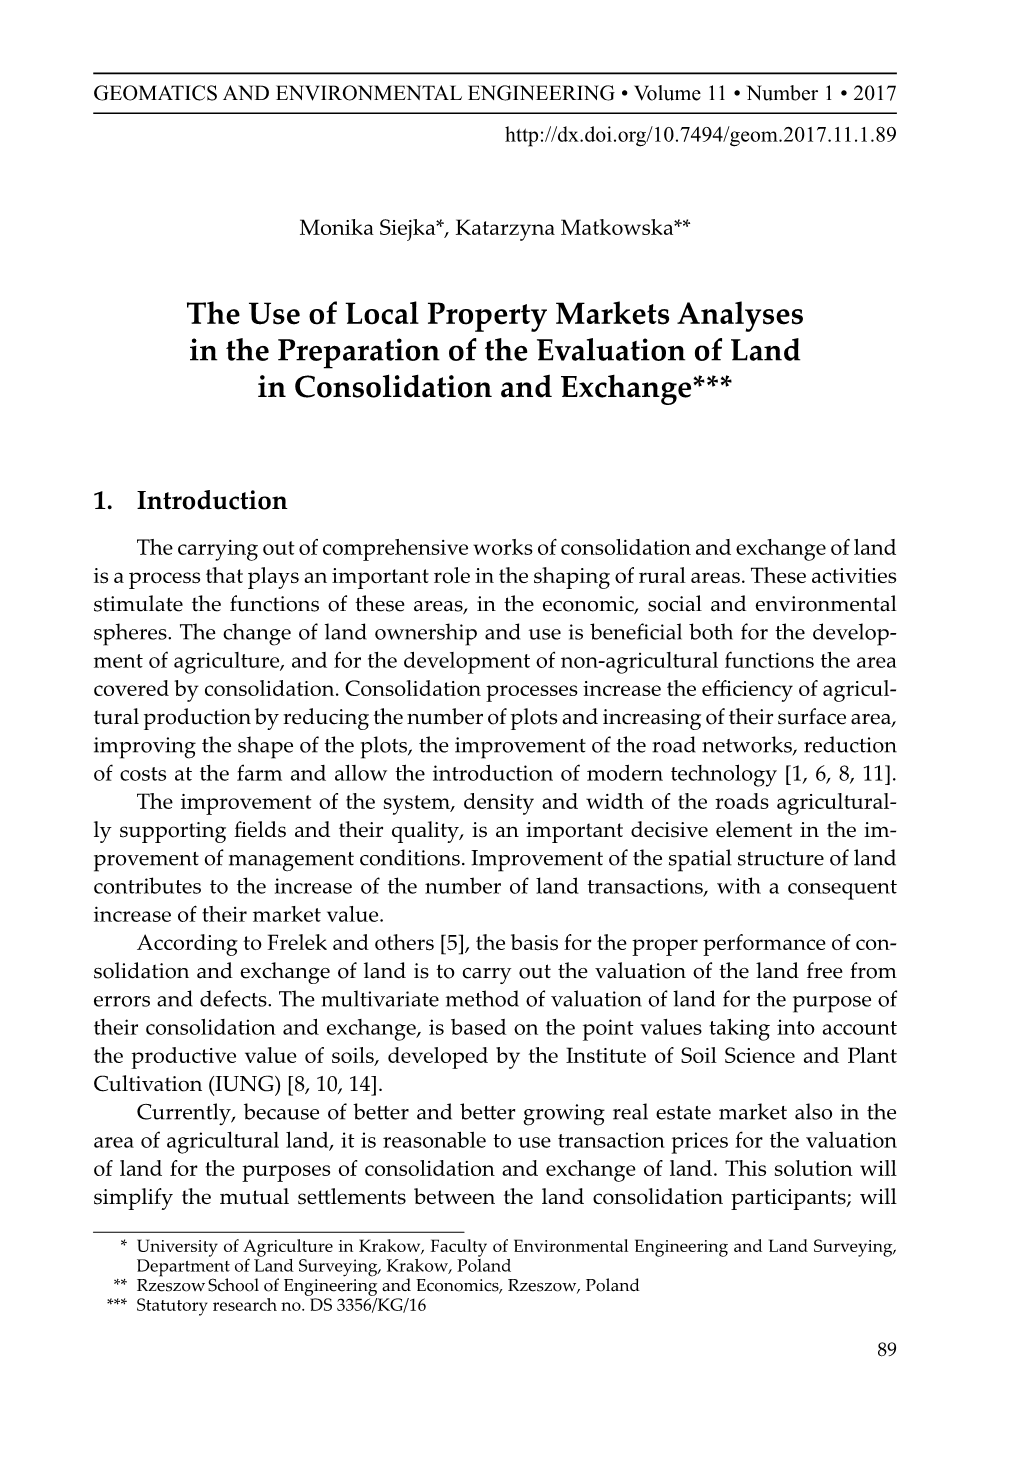 The Use of Local Property Markets Analyses in the Preparation of the Evaluation of Land in Consolidation and Exchange***